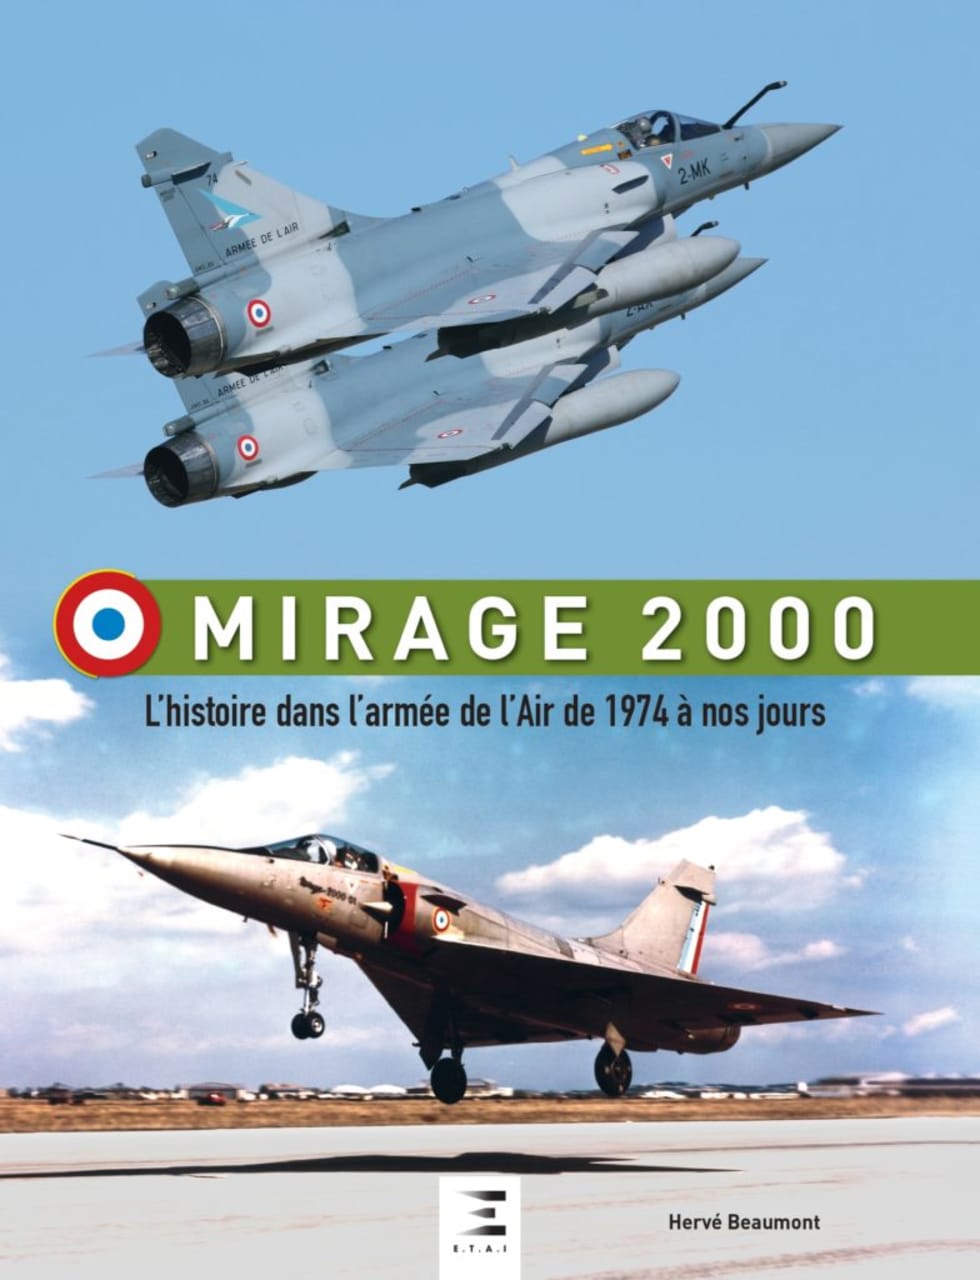 Mirage 2000 Book Cover